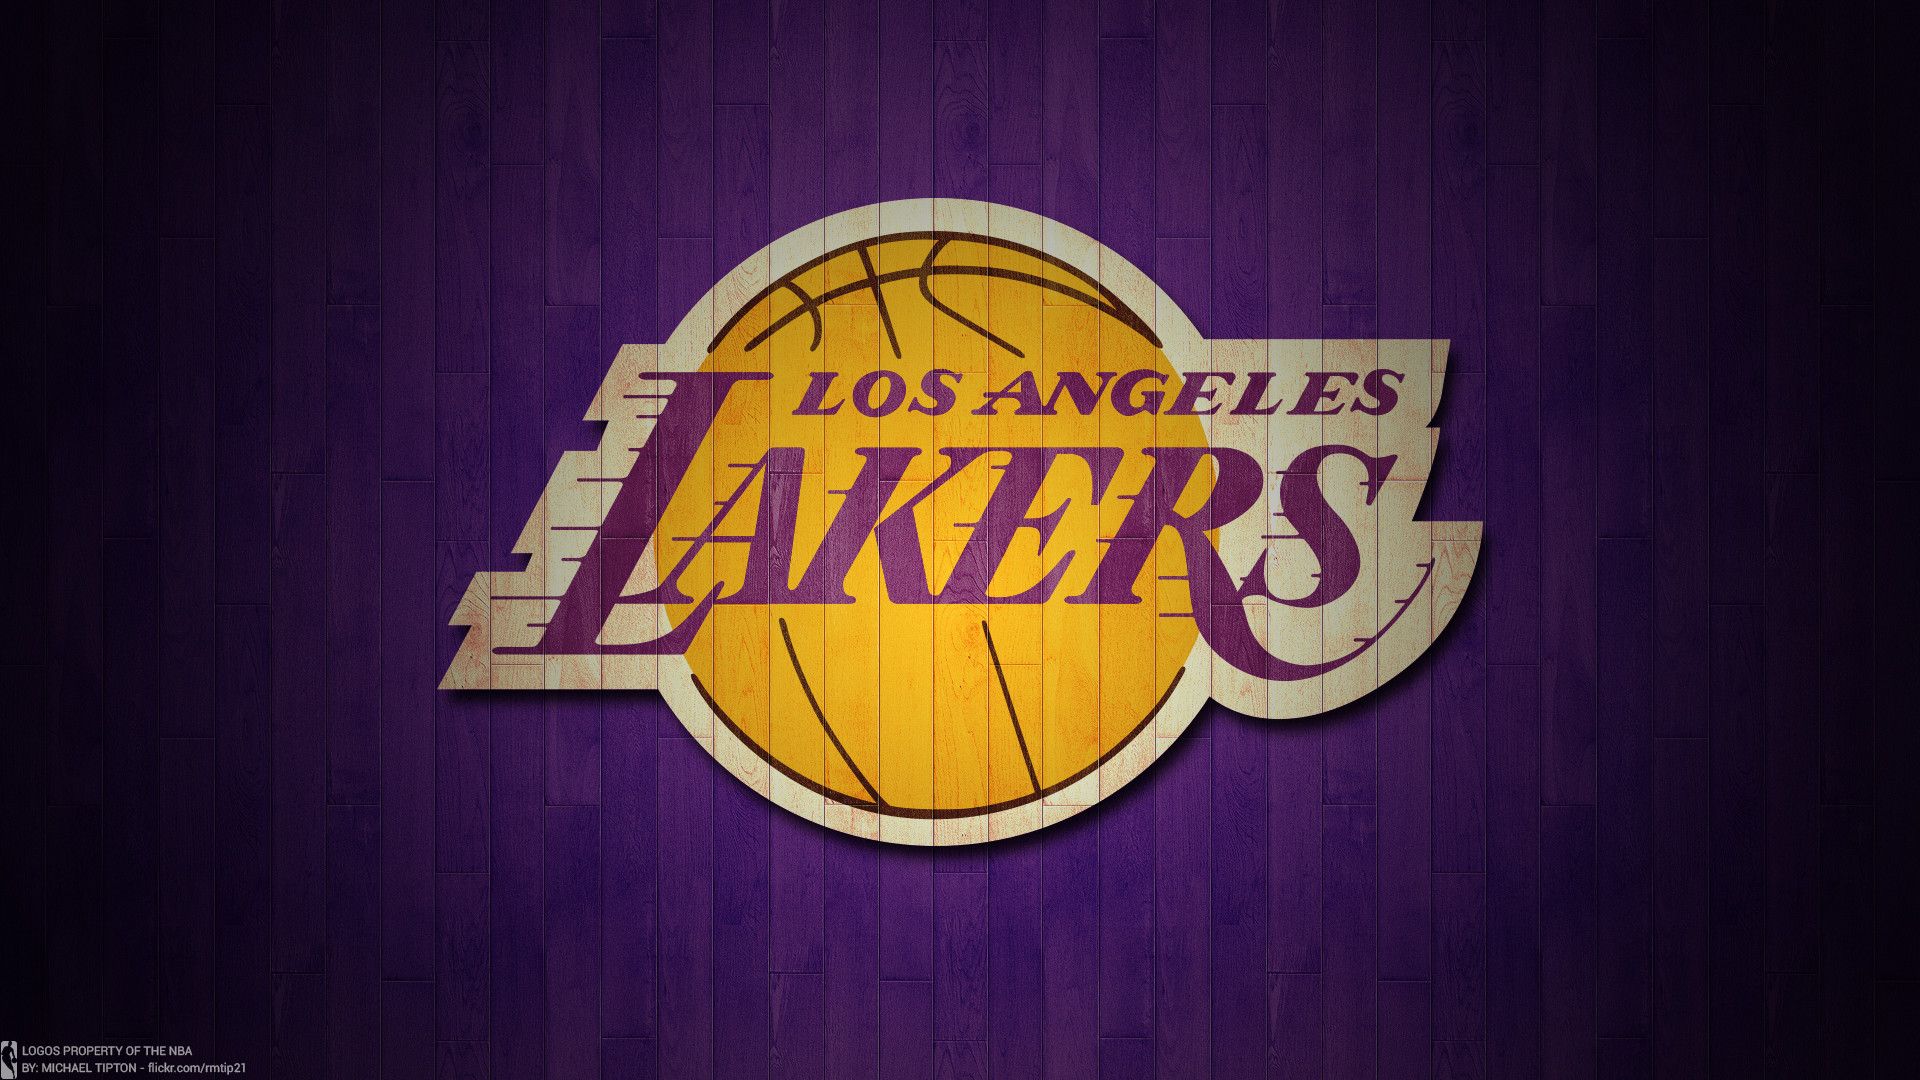 Mobile wallpaper Sports Basketball Logo Nba Los Angeles Lakers 475726  download the picture for free